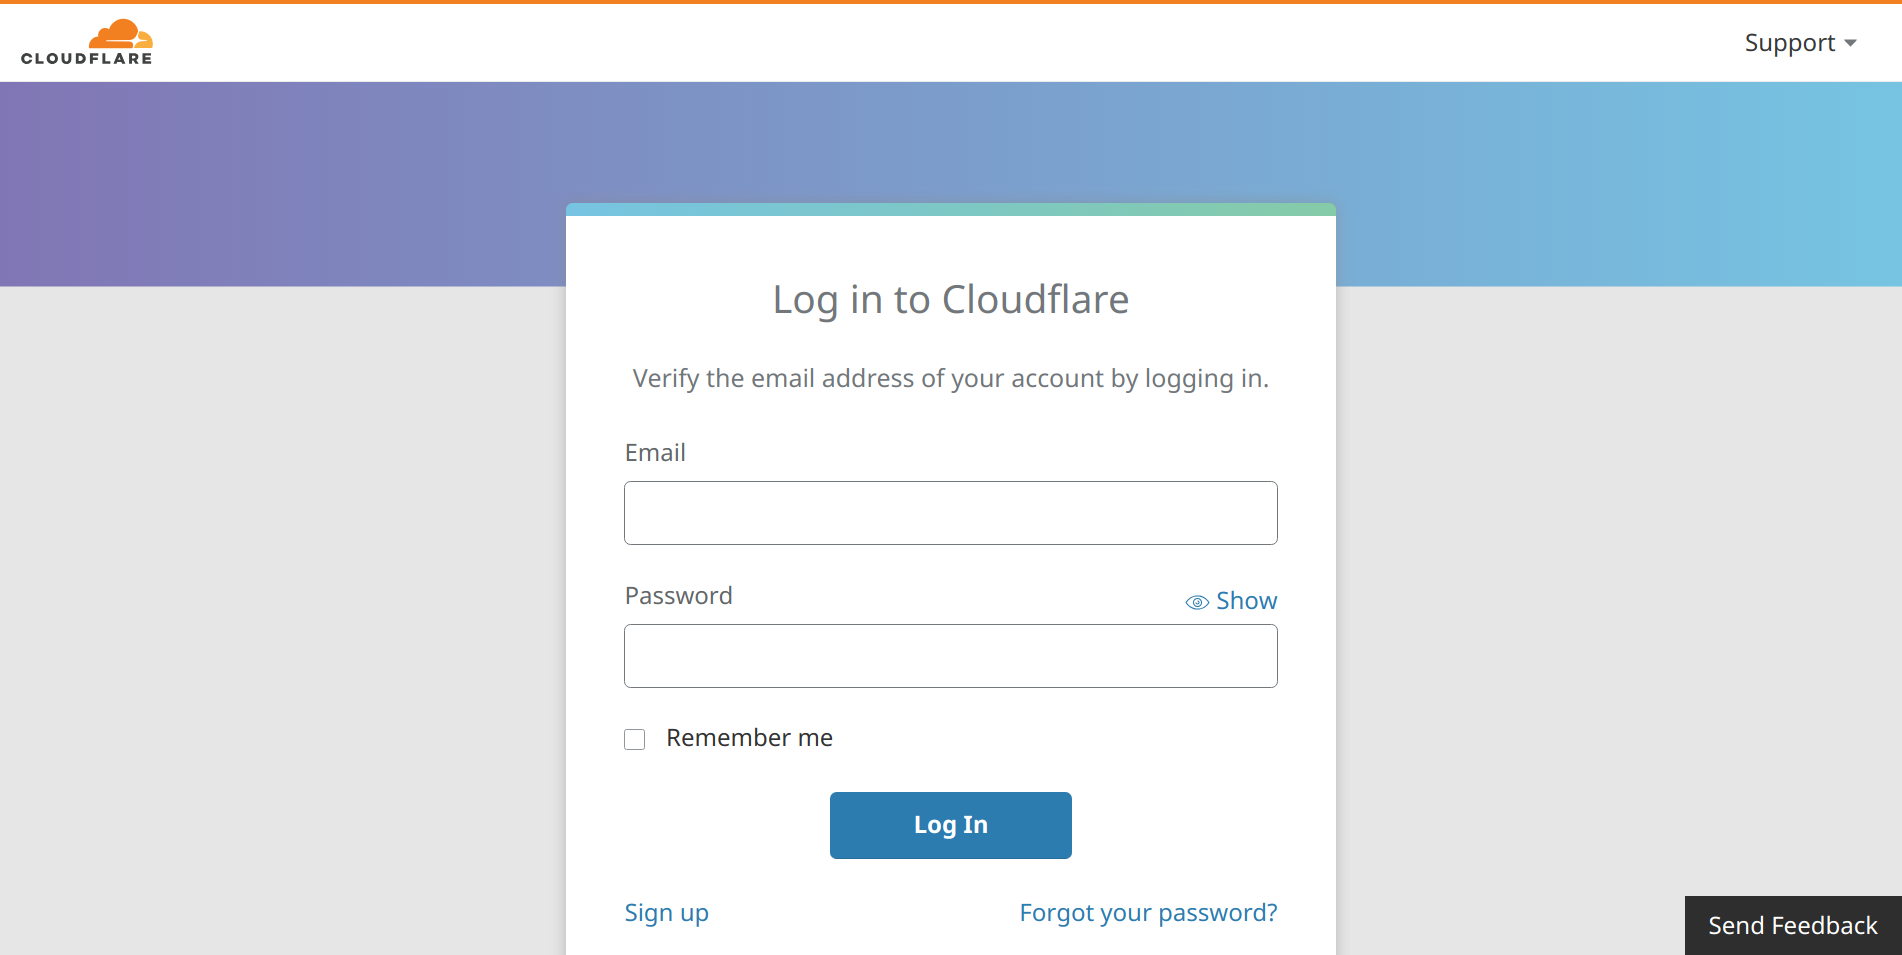 A screenshot of Cloudflare prompting me to log in with my username and password in order to verify my email address.